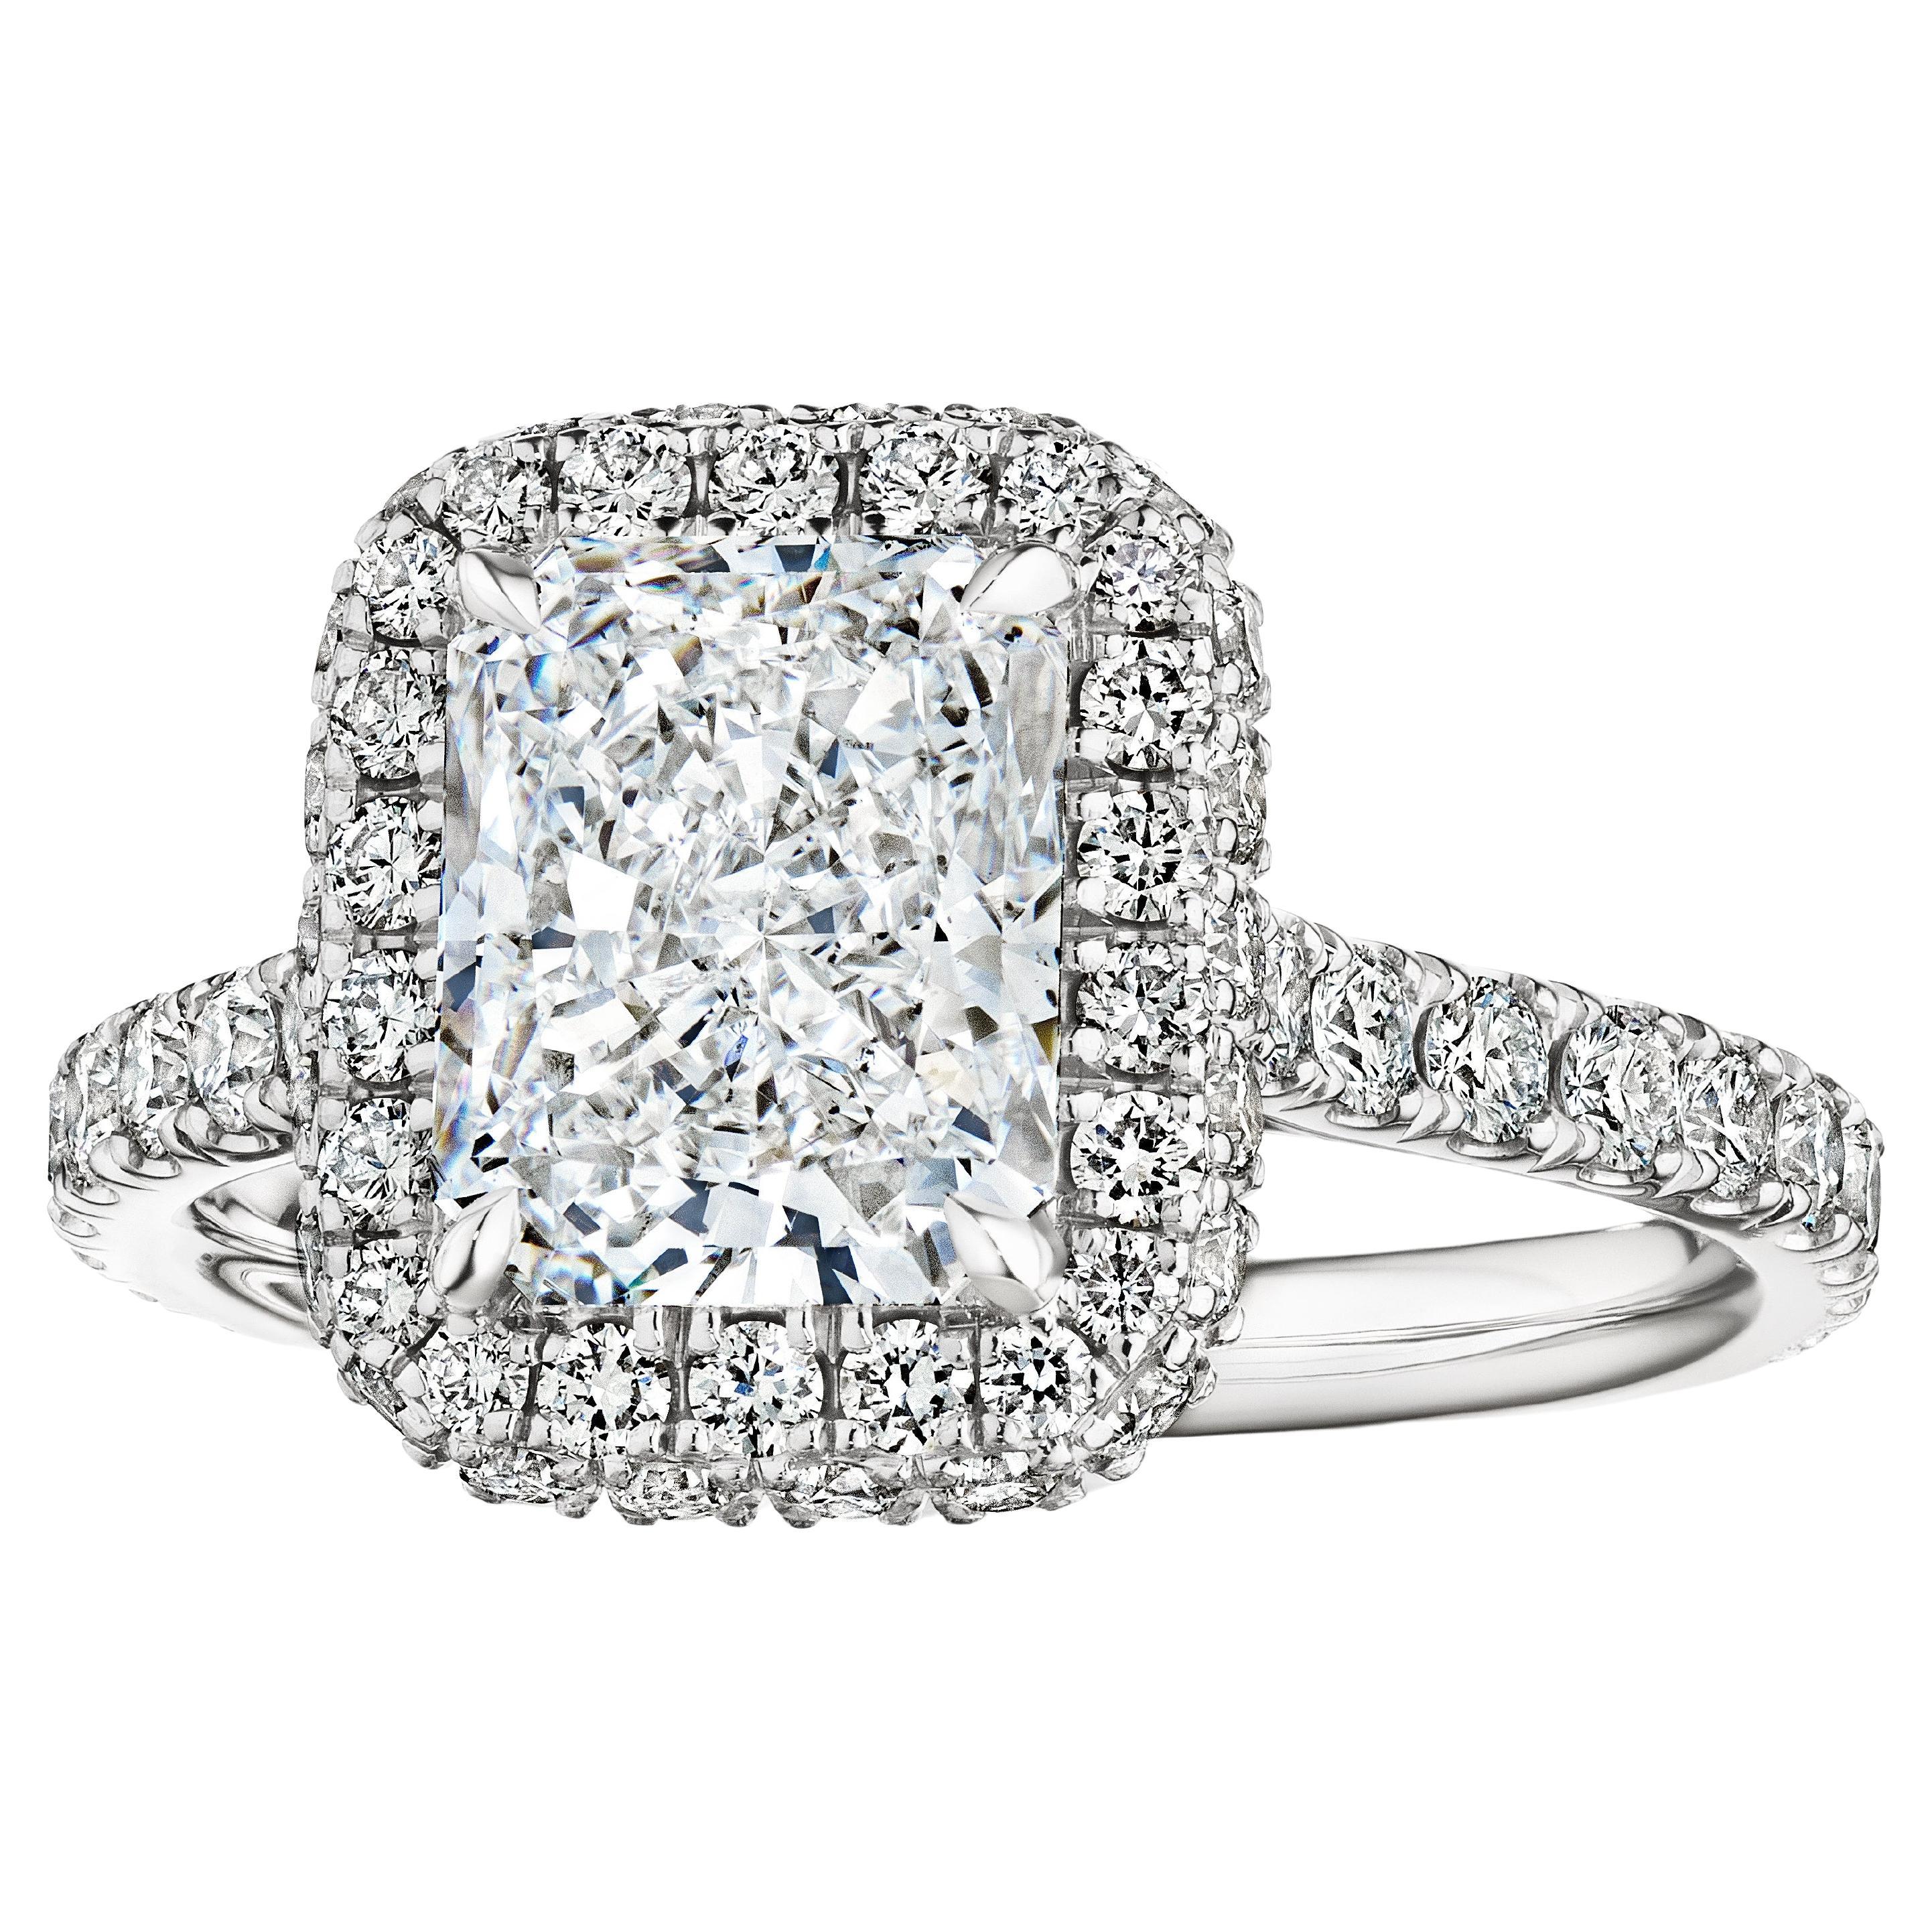 GIA Certified 2.51 Carat D VS2 Radiant Diamond Engagement Ring "Adele" For Sale